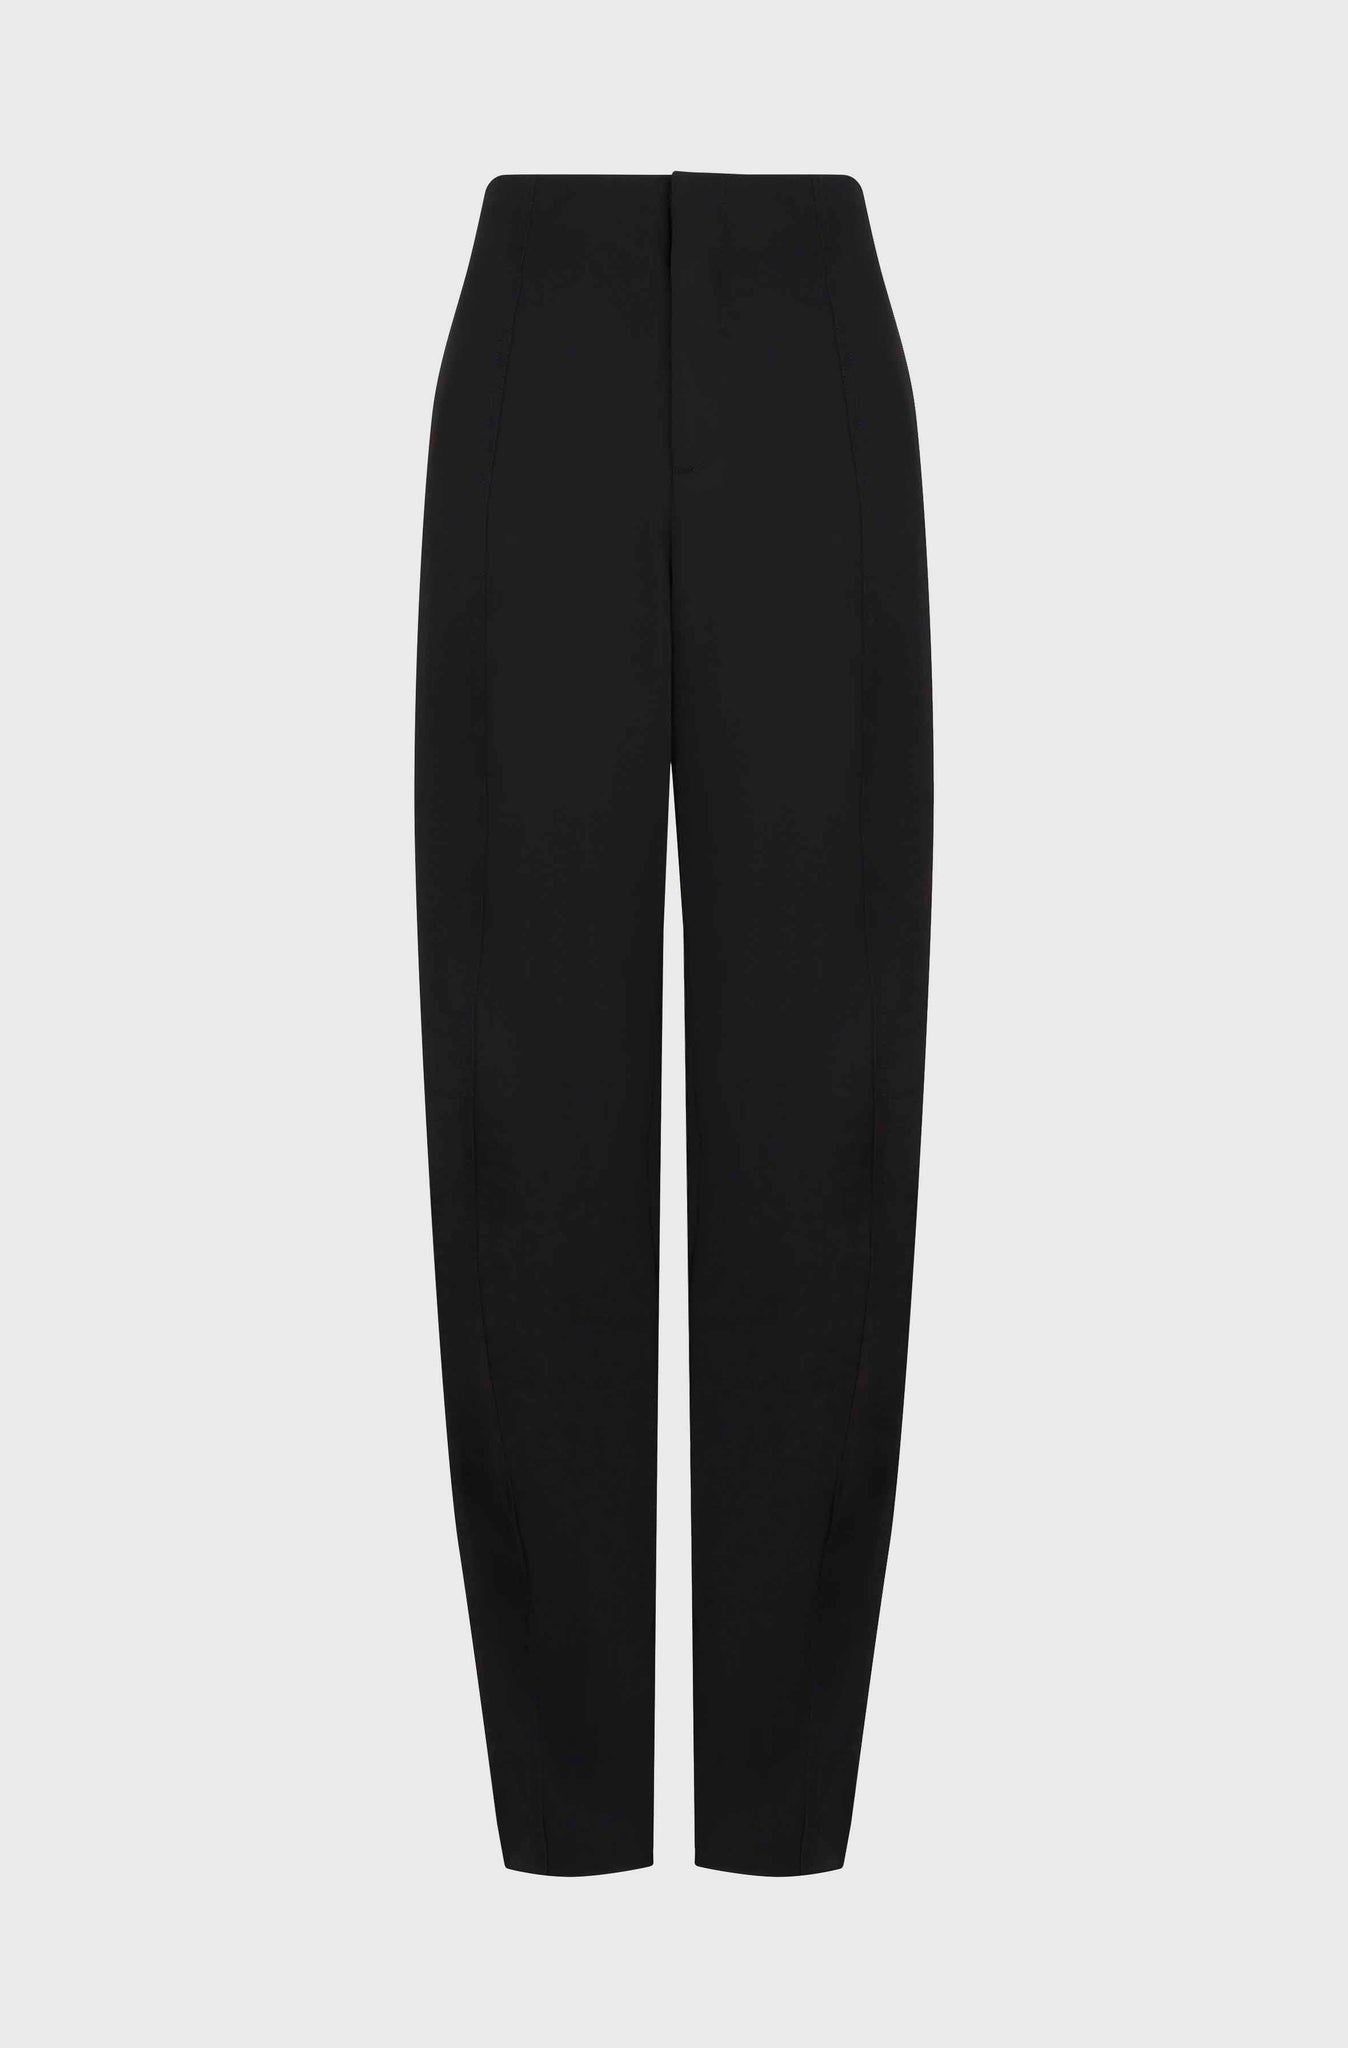 TAILORED BENT KNEE TROUSERS - BLACK